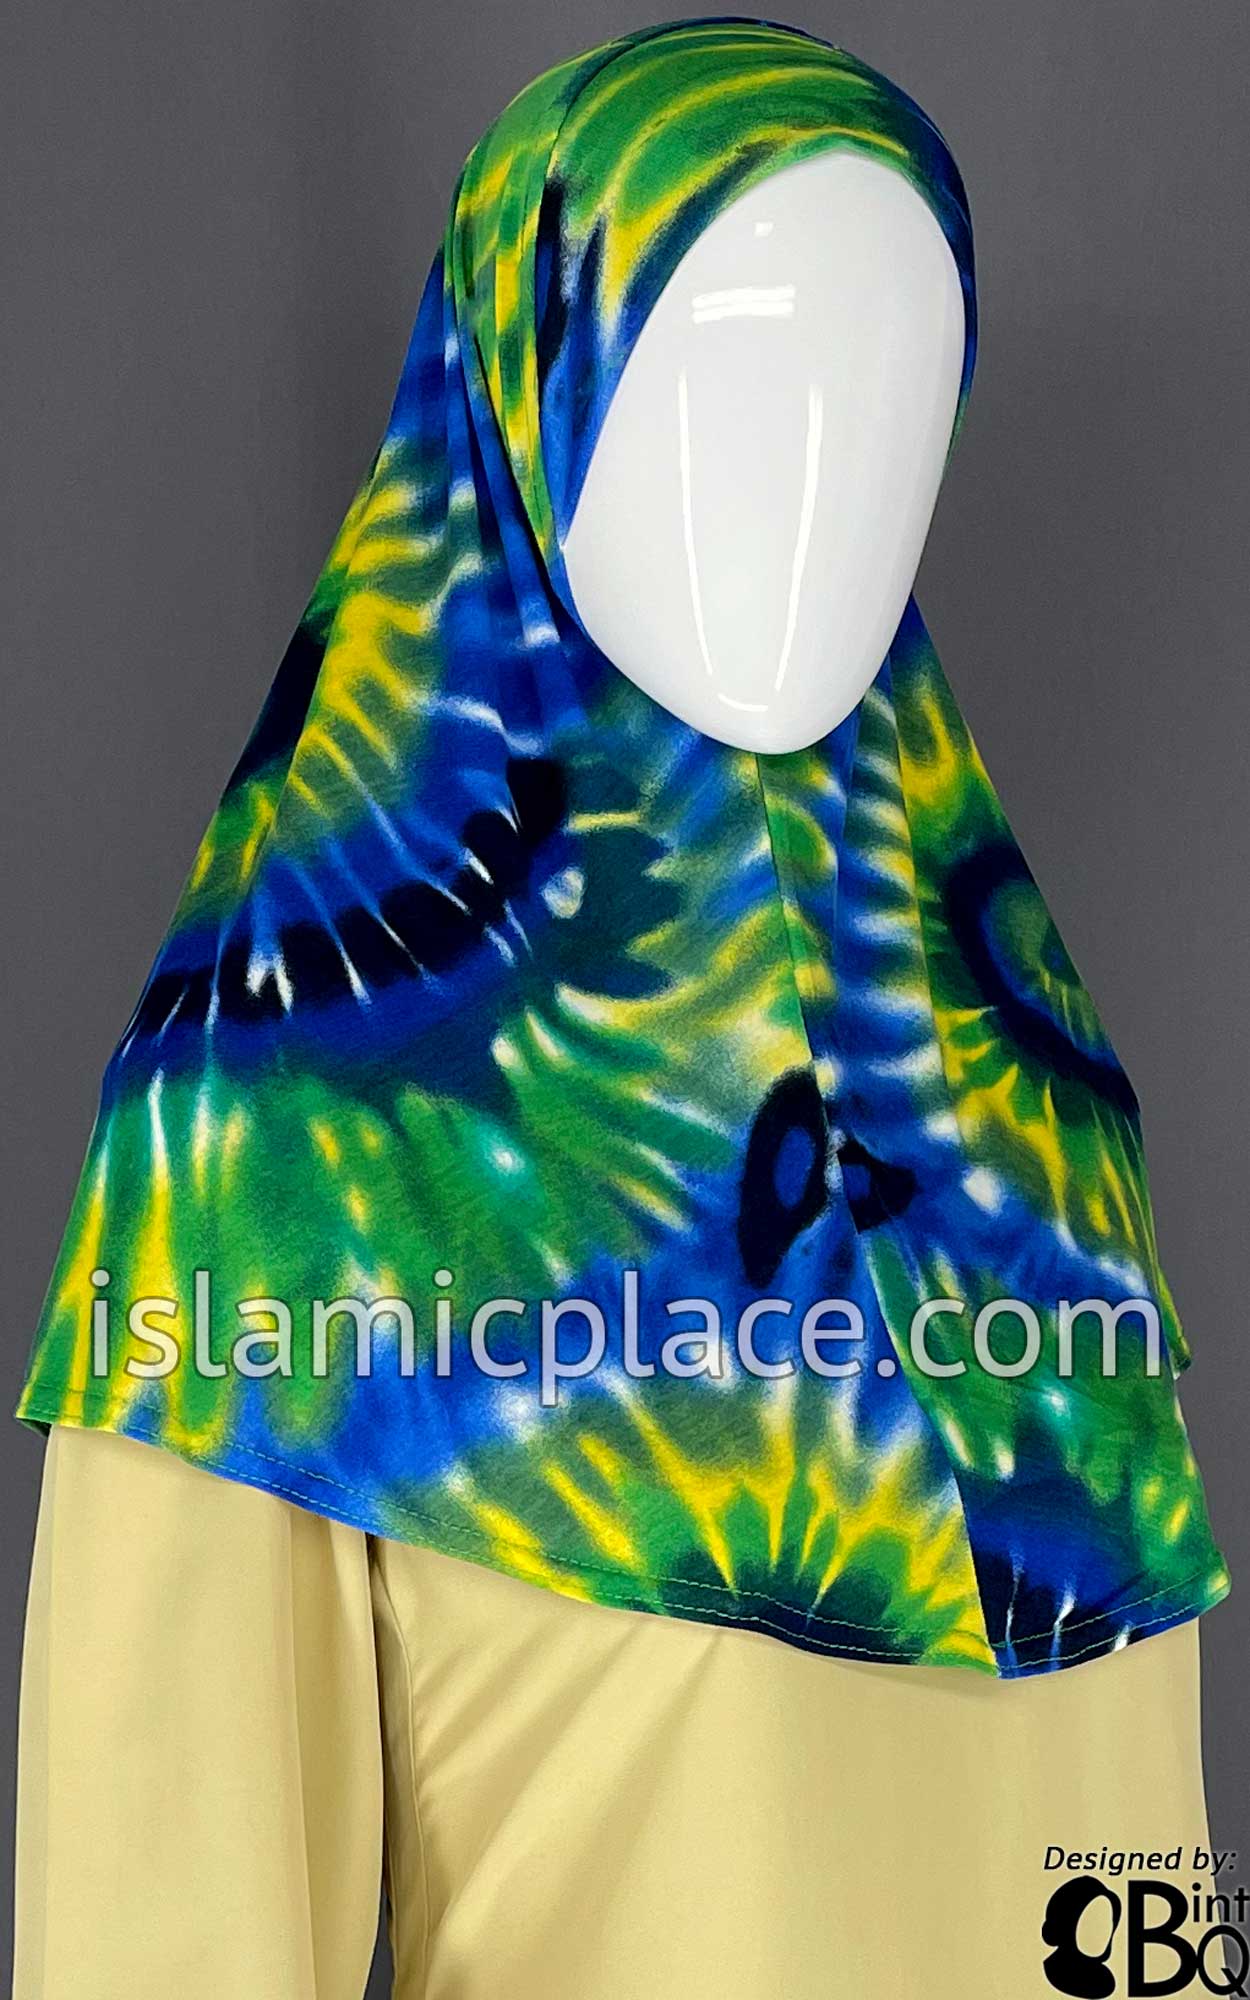 Navy Blue, Green and Yellow Sunburst Tie-Dye Design - Printed Teen to Adult (Large) Hijab Al-Amira (1-piece style)